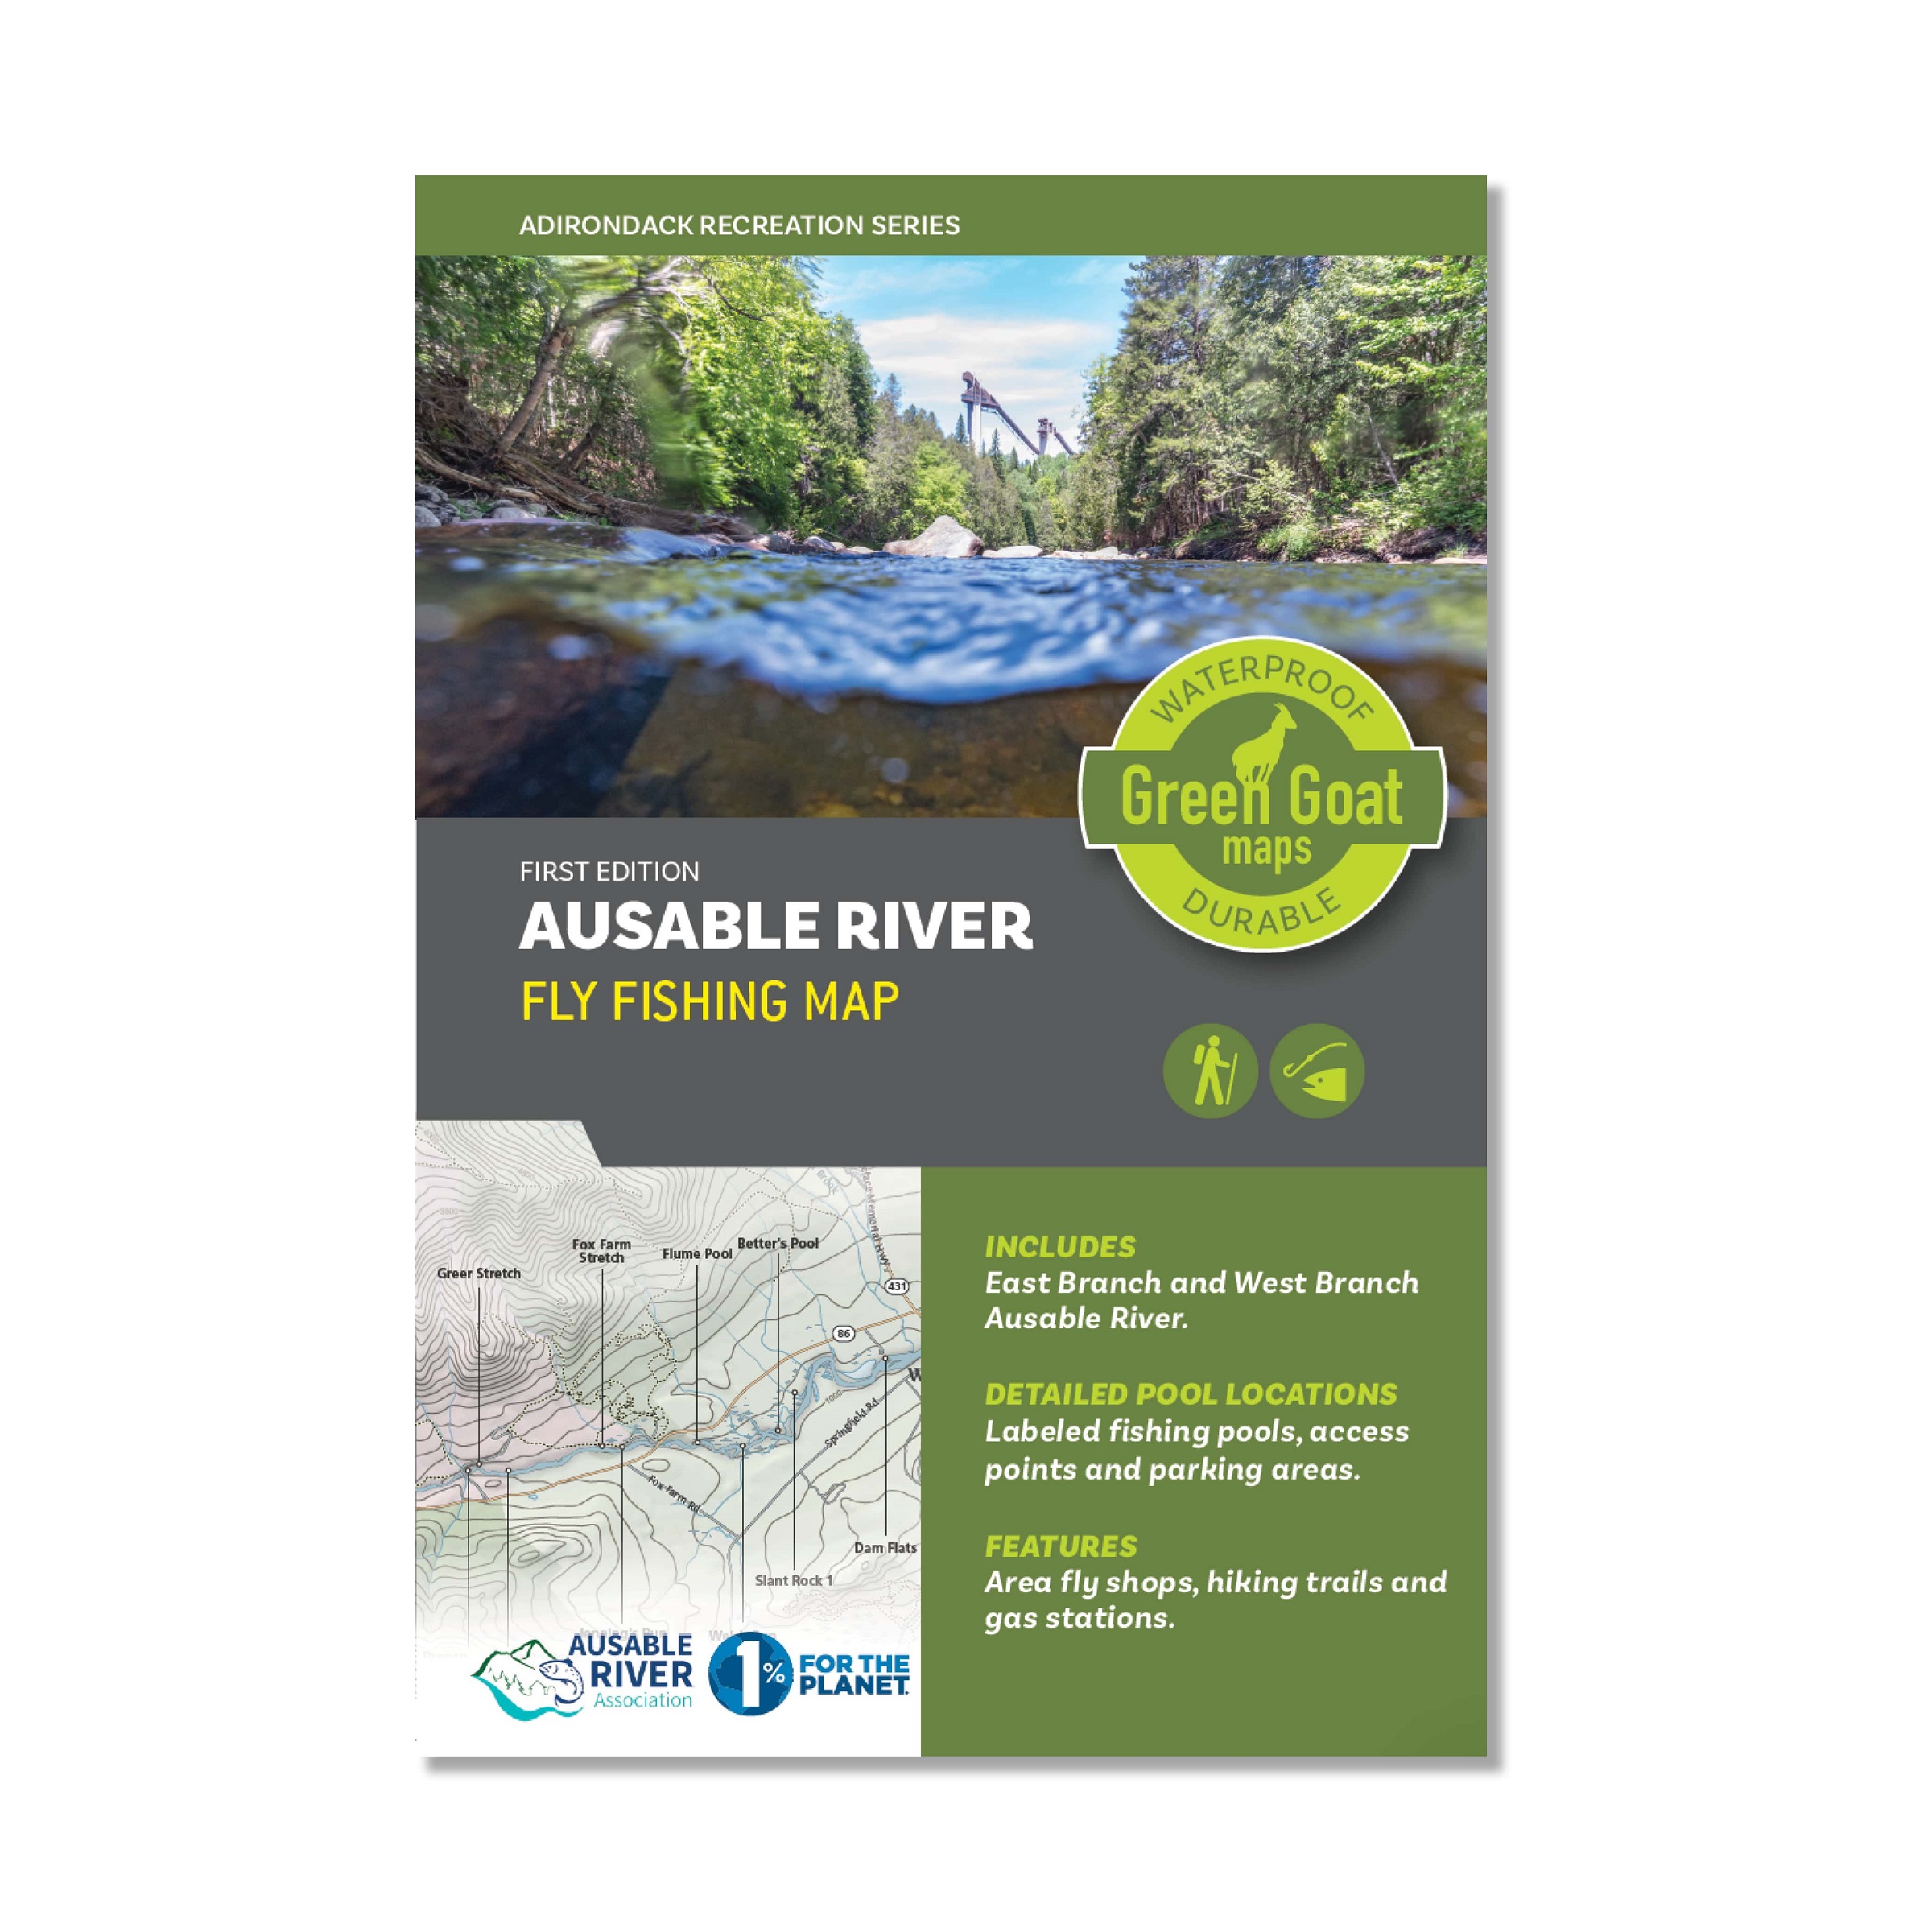 Ausable River Fly Fishing Map - Green Goat Maps